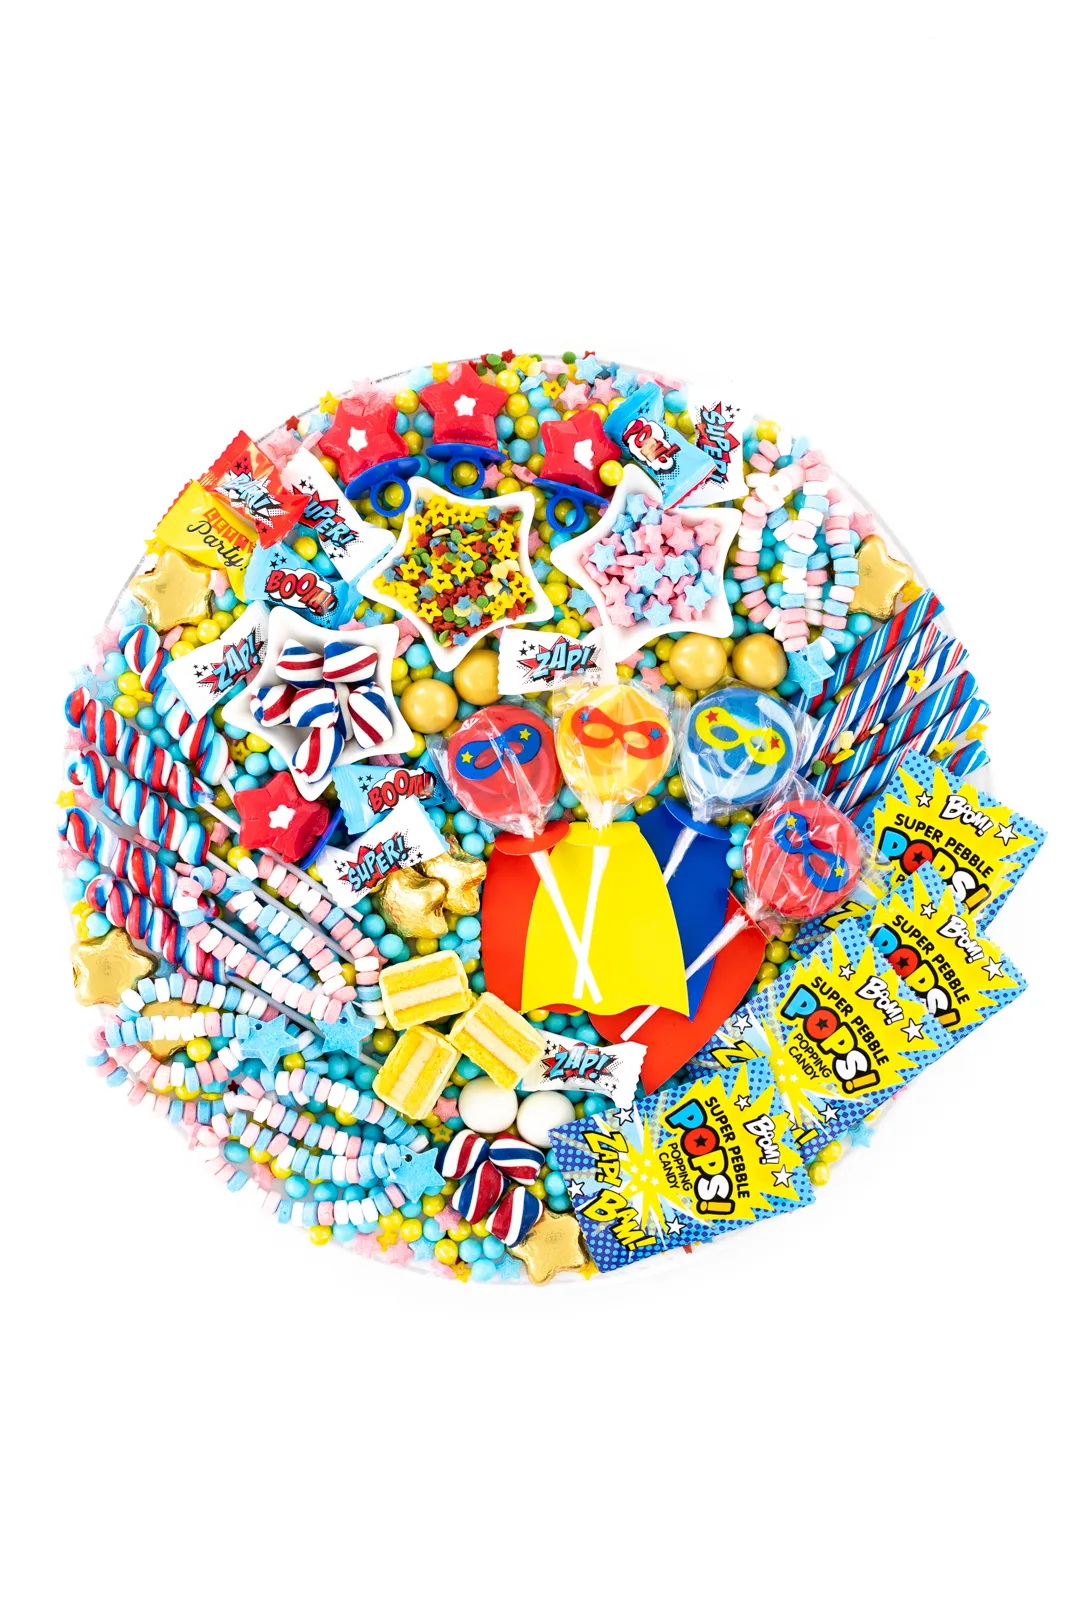 superhero candy charcuterie board with yellow, red, white and blue candy